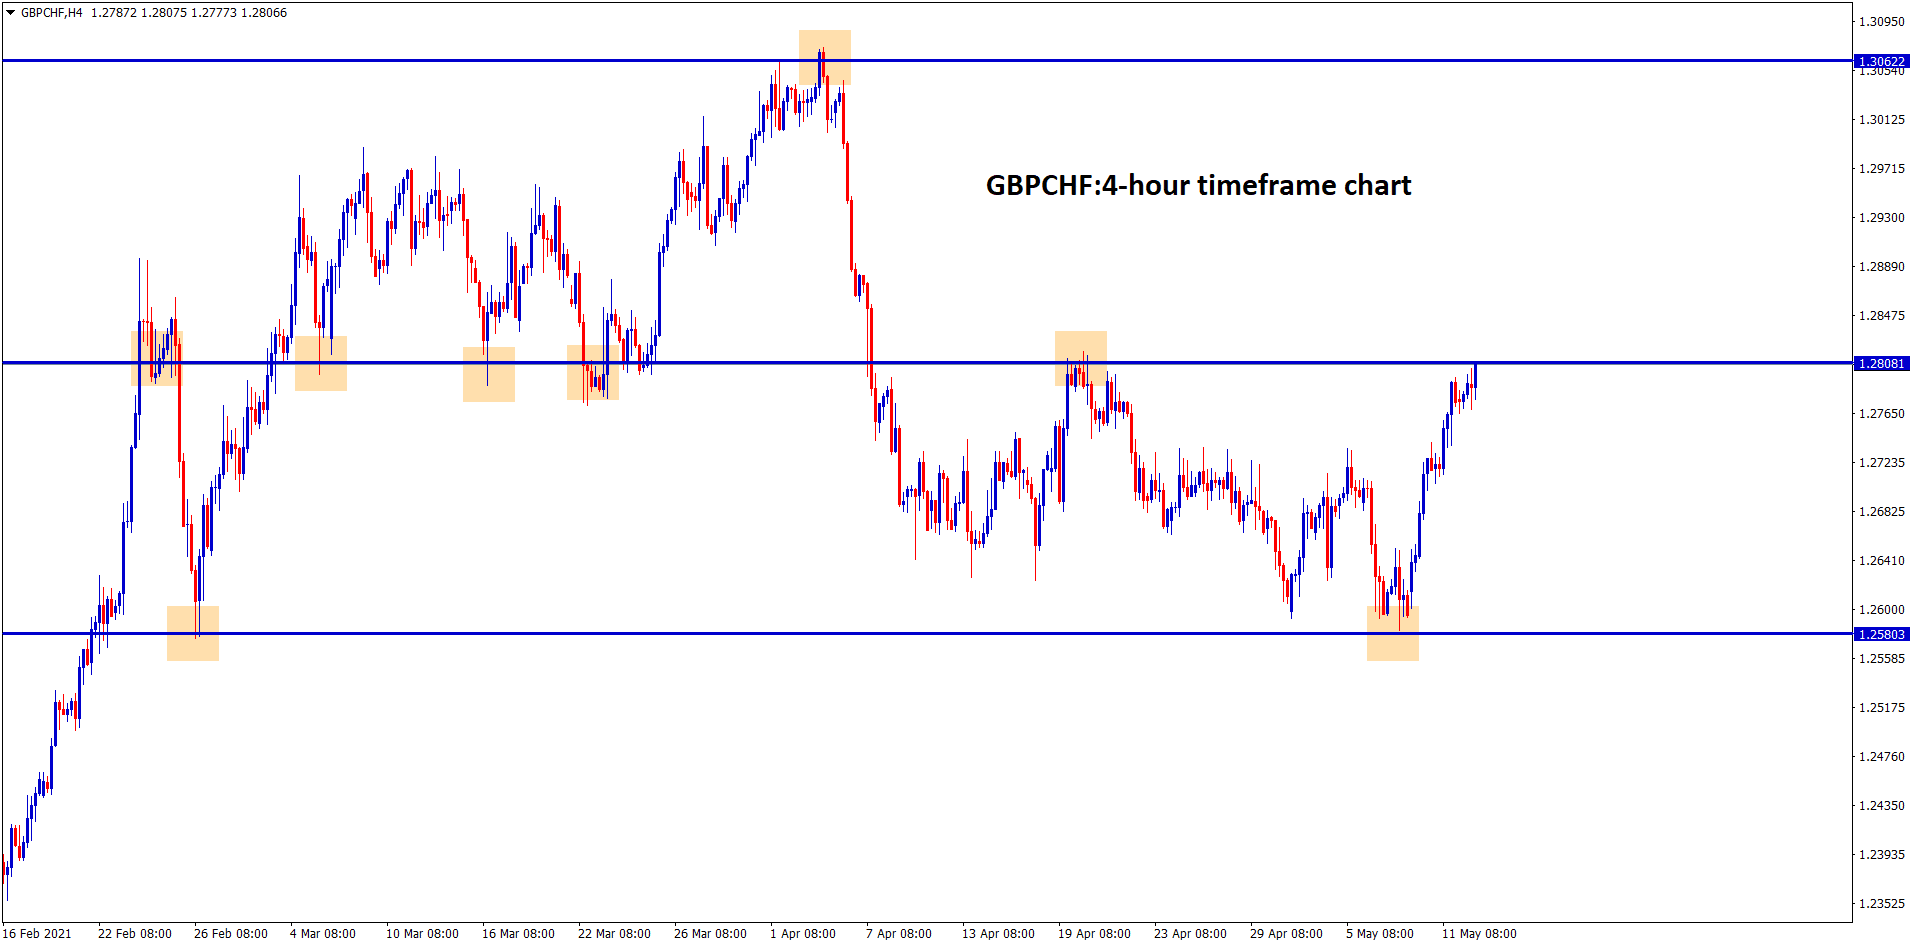 GBPCHF reached the resistance level which is the old uspport level.